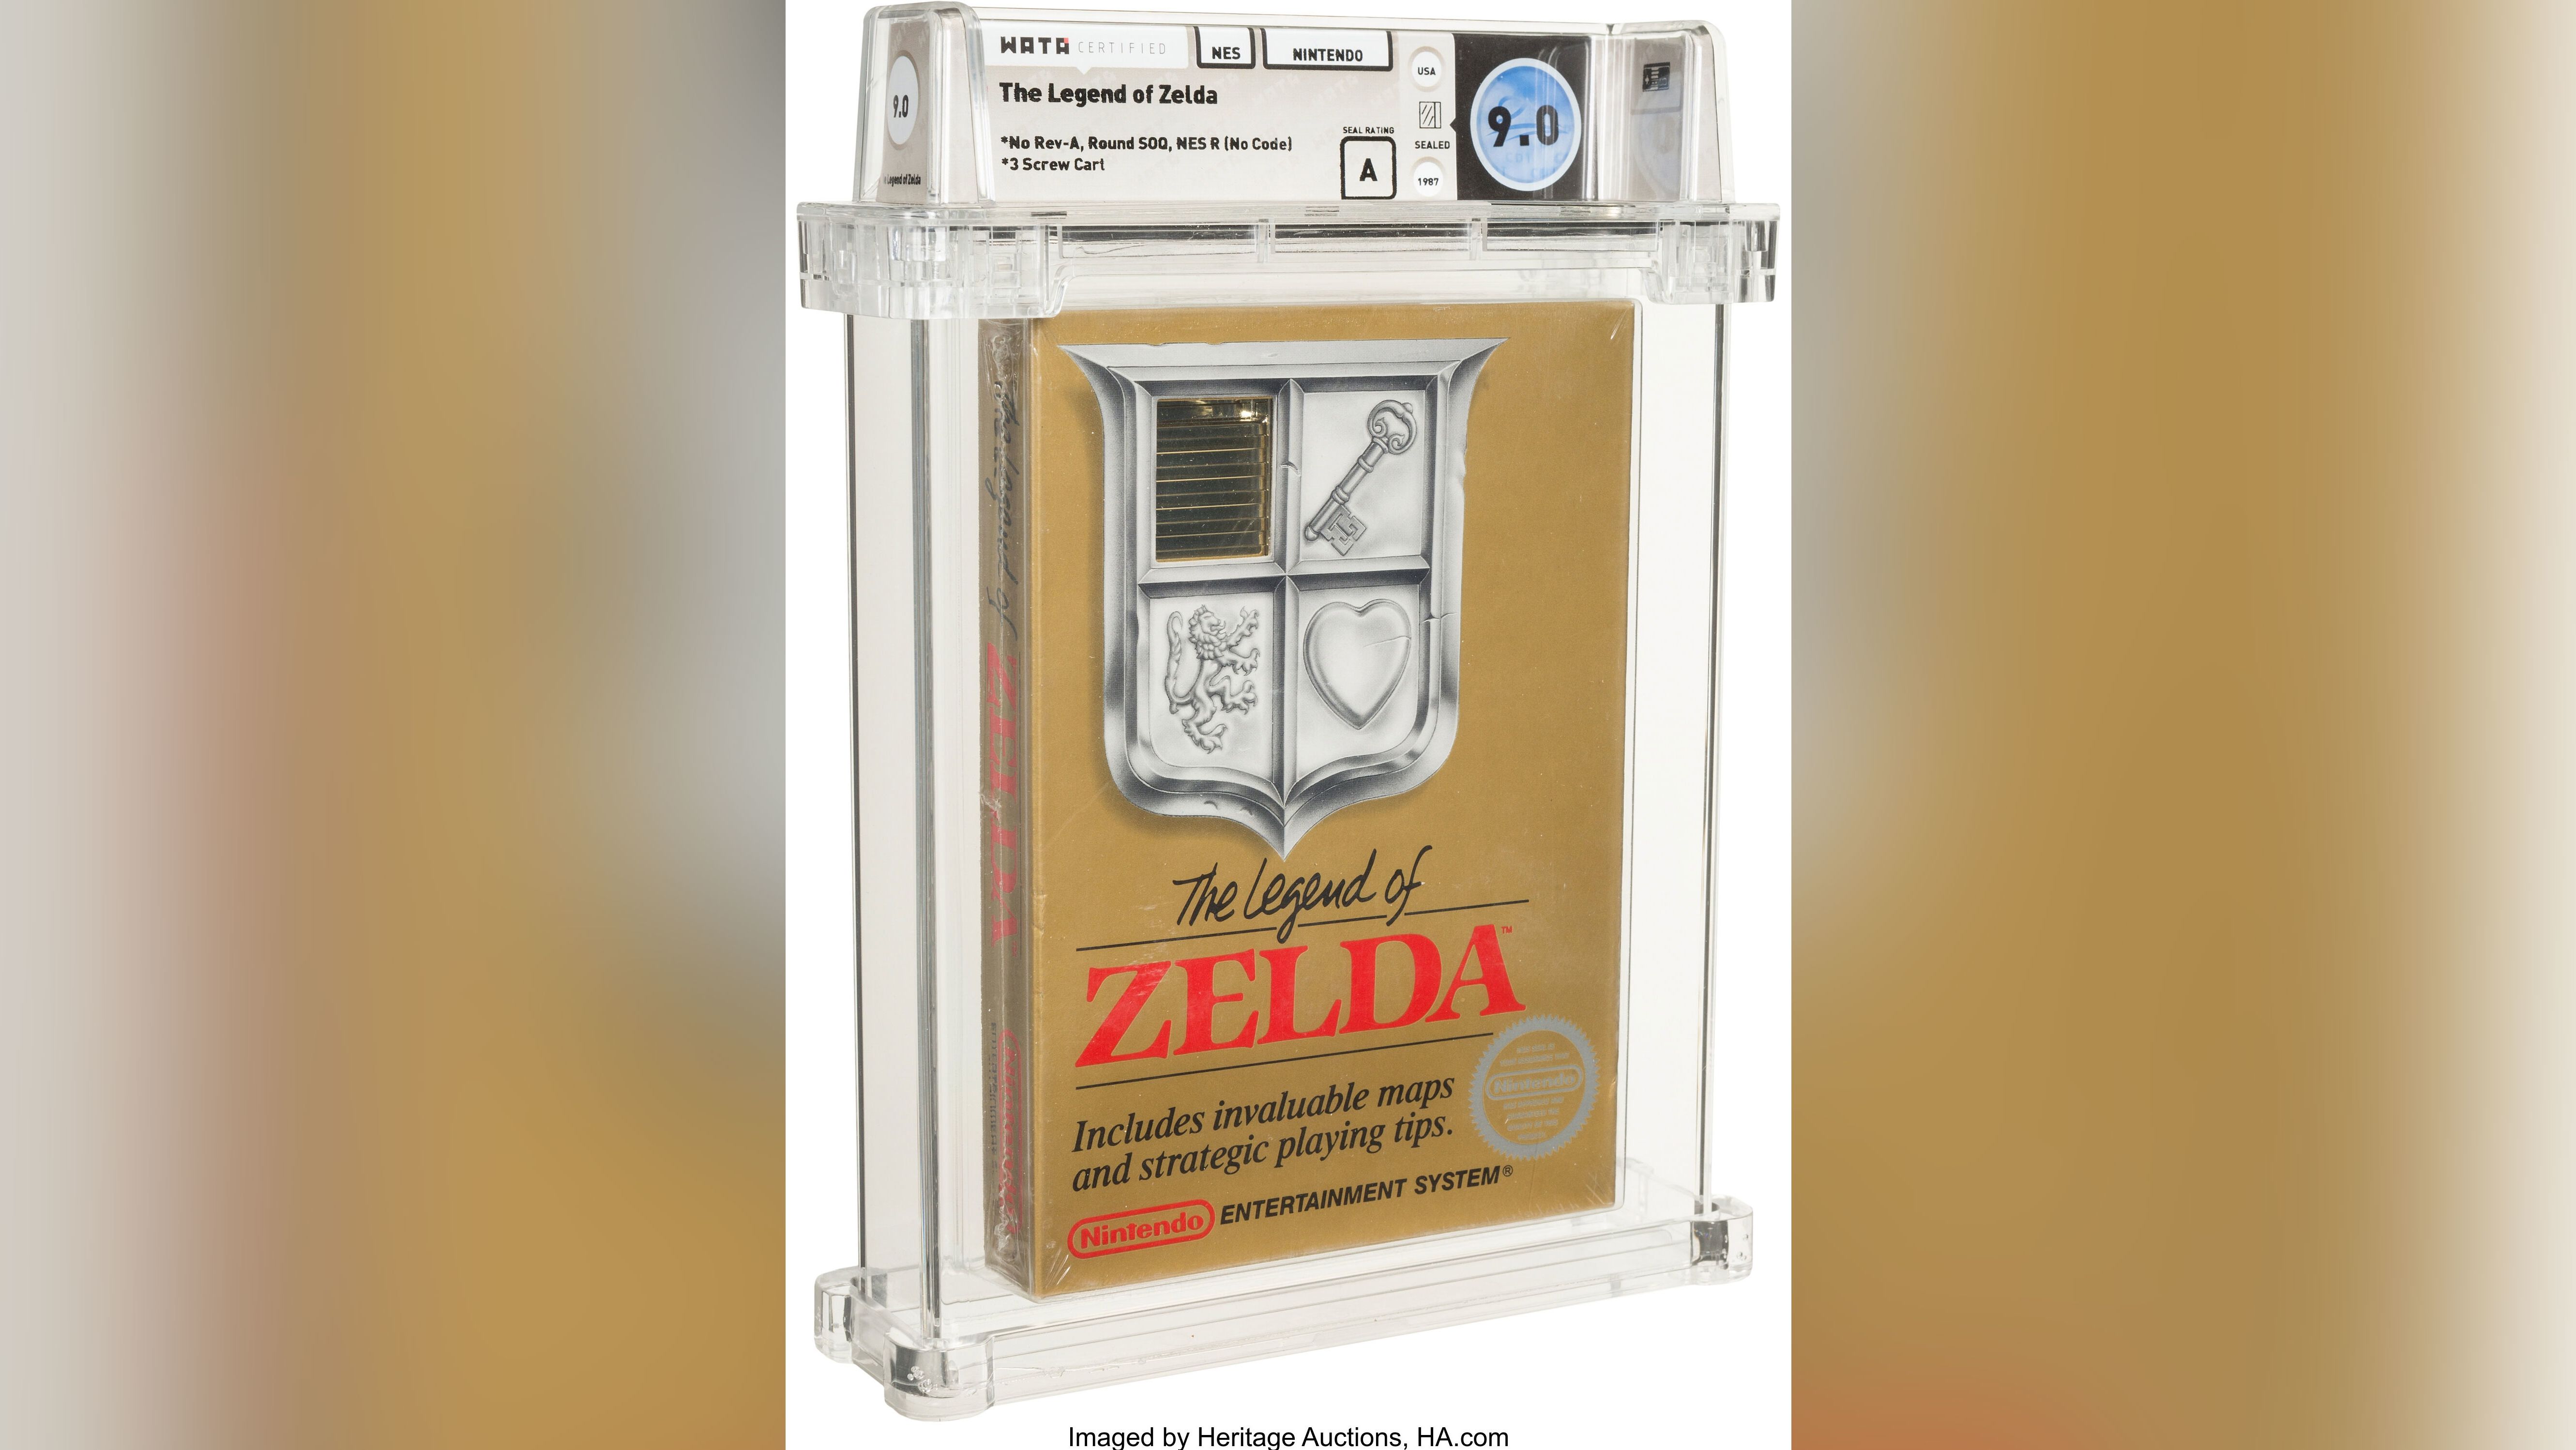 Legend of Zelda' sells for $870,000 at auction, a record for a video game